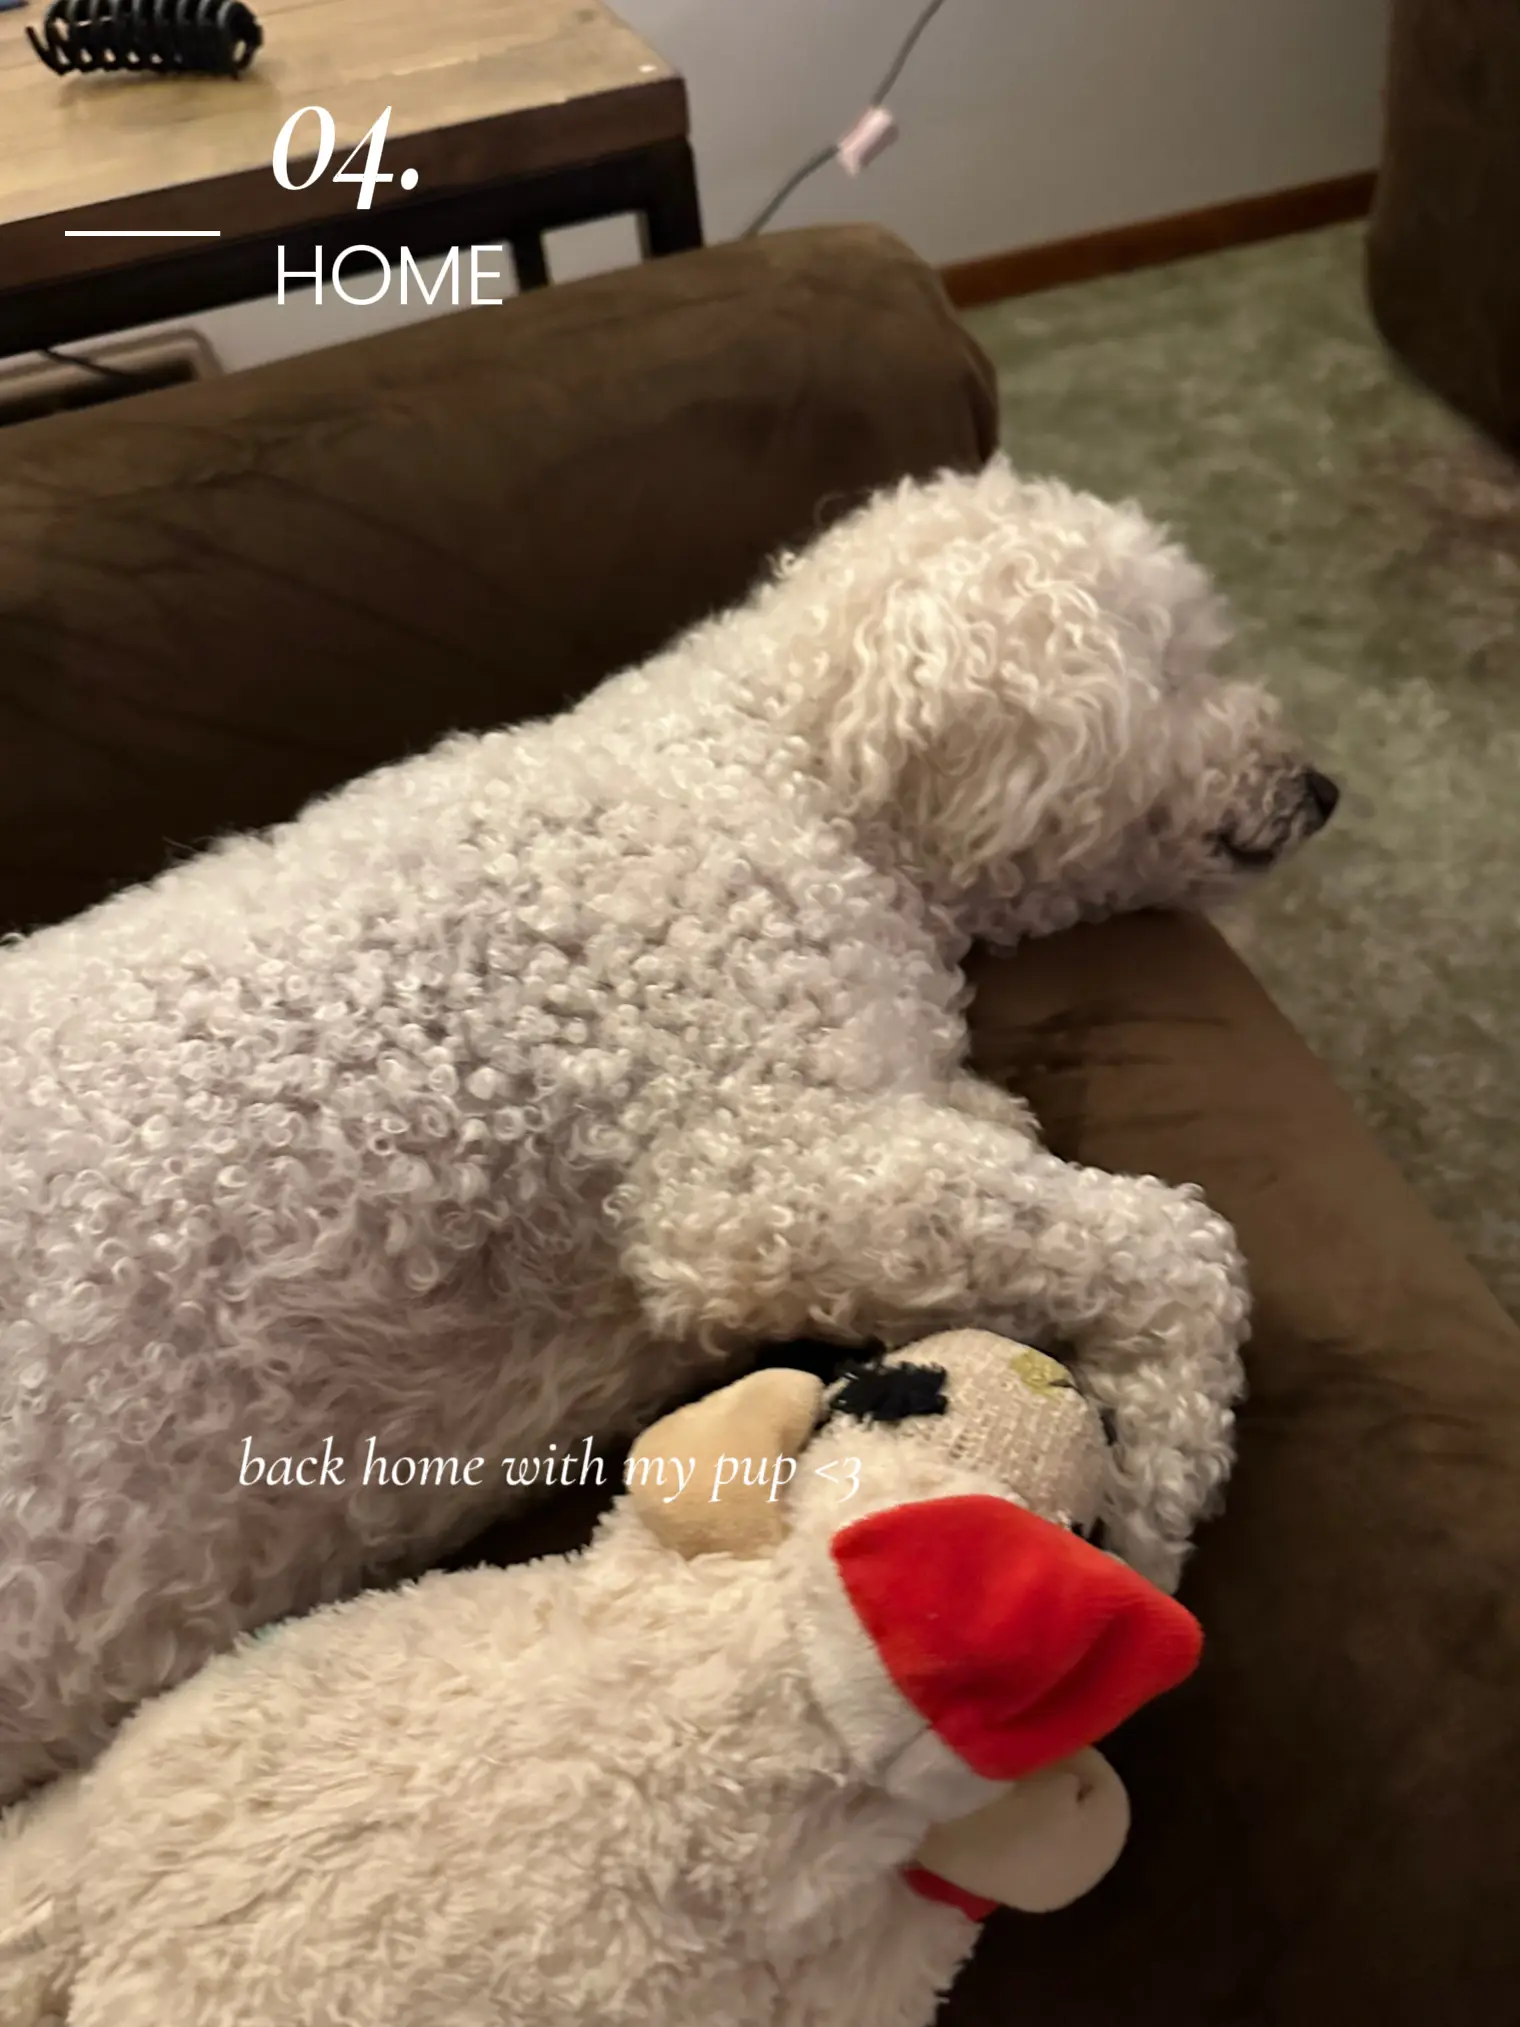  A white dog is laying on a couch.